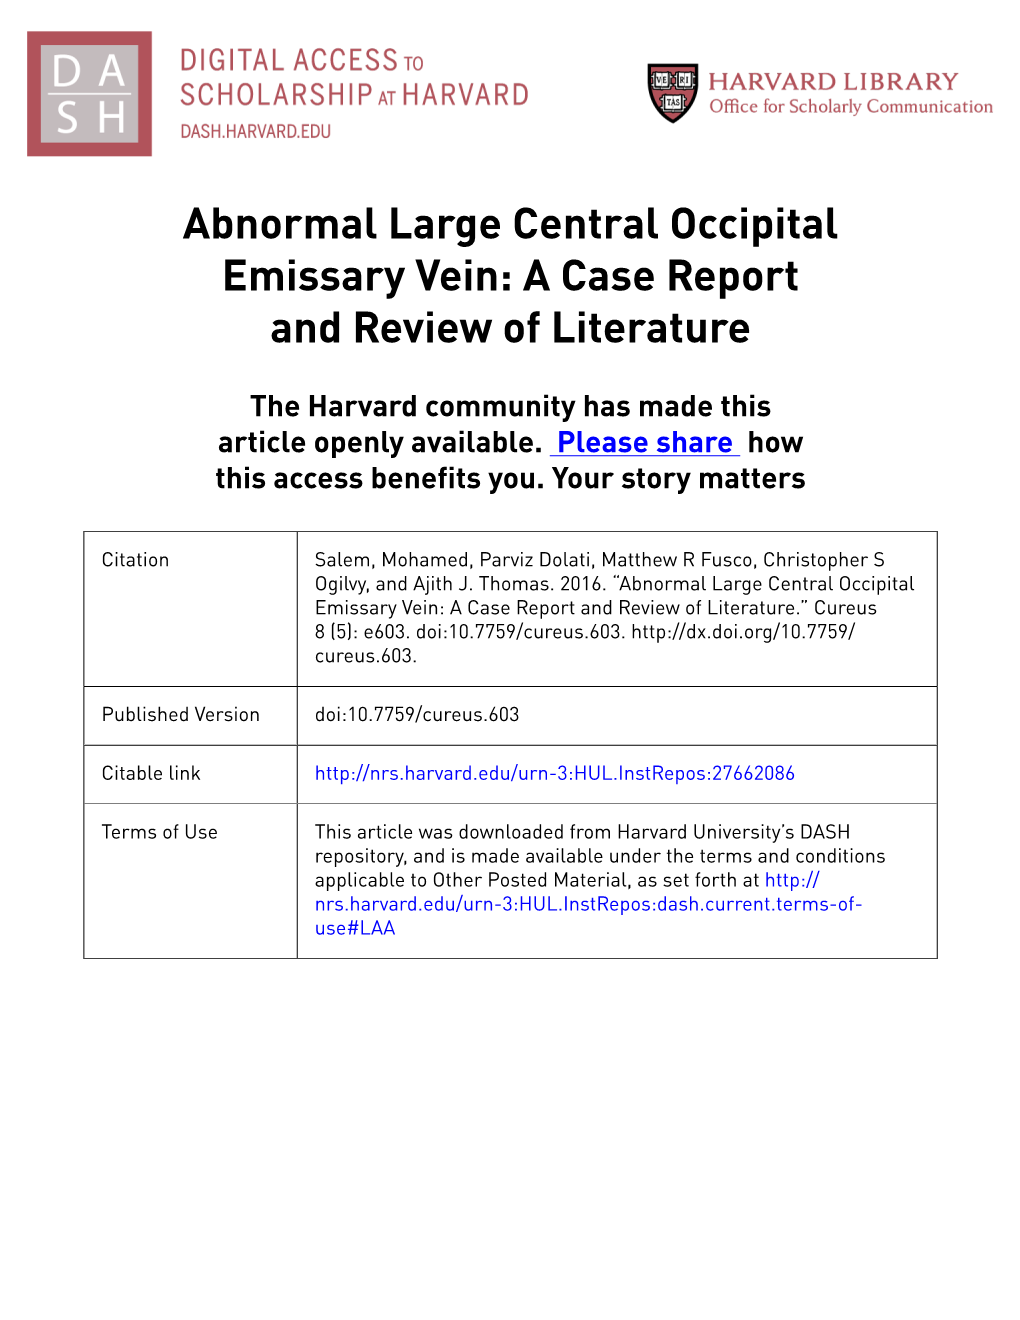 Abnormal Large Central Occipital Emissary Vein: a Case Report and Review of Literature